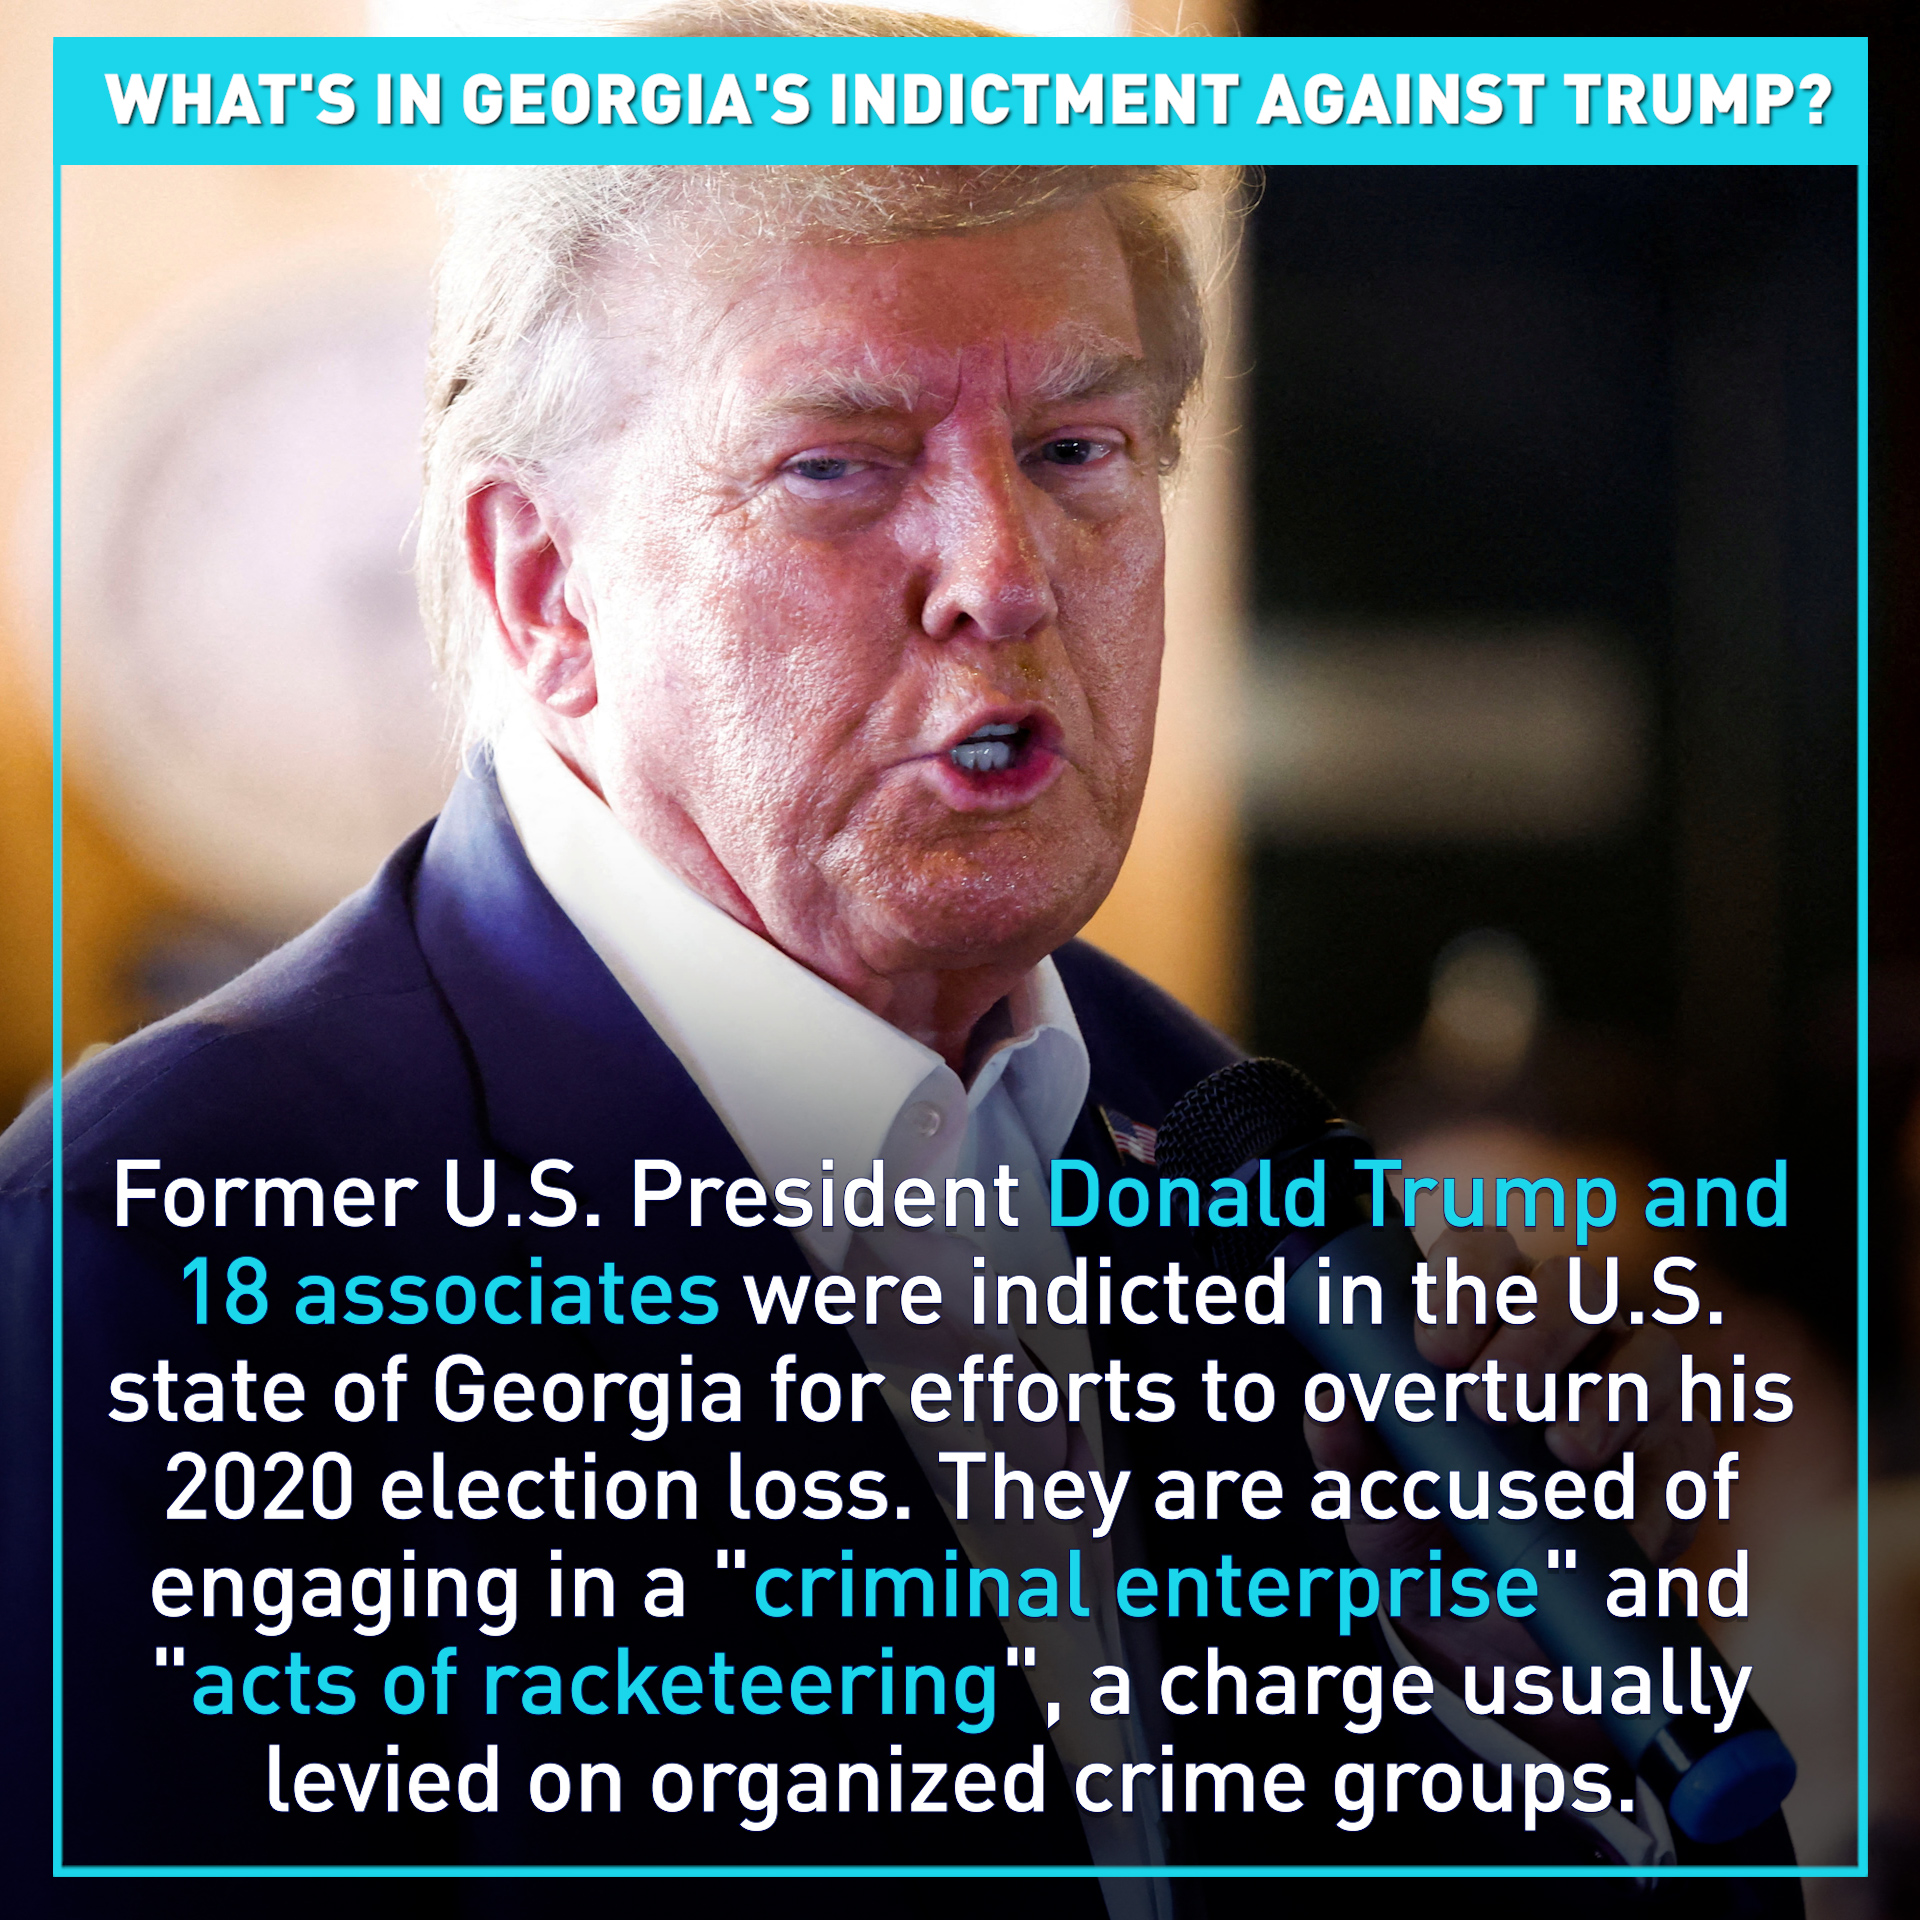 What is in Georgia's indictment against Trump?